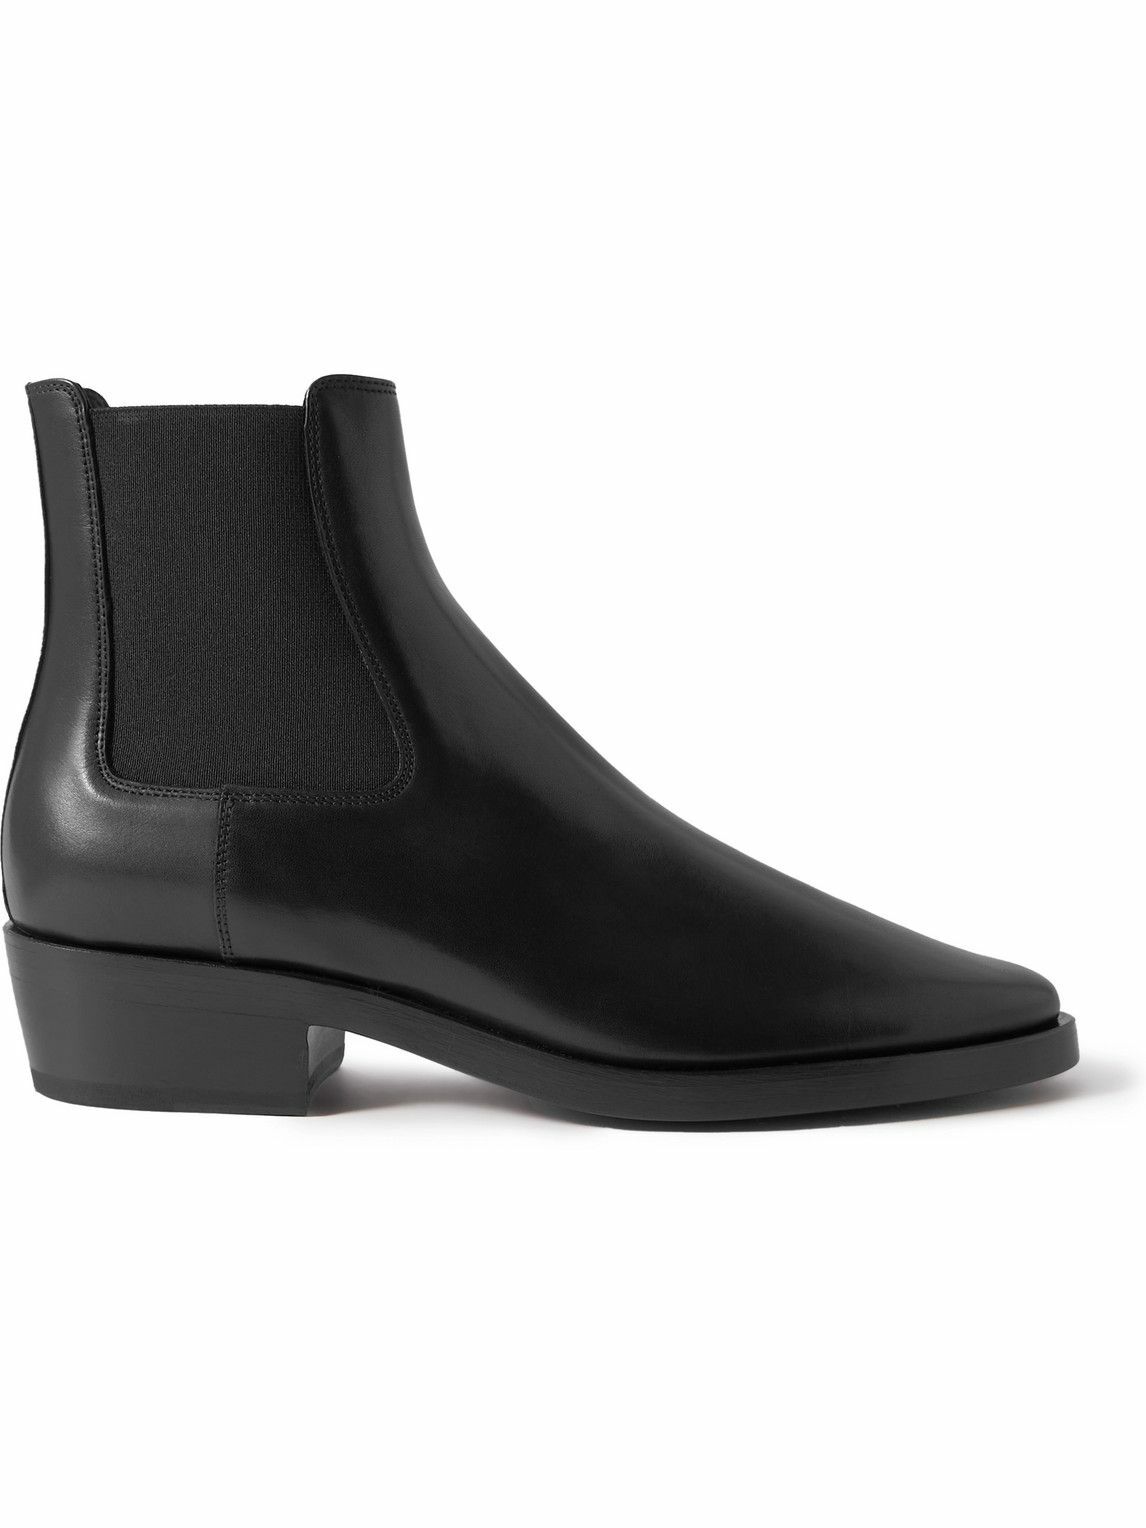 Fear of God - Eternal Leather Chelsea Boots - Black Fear Of God